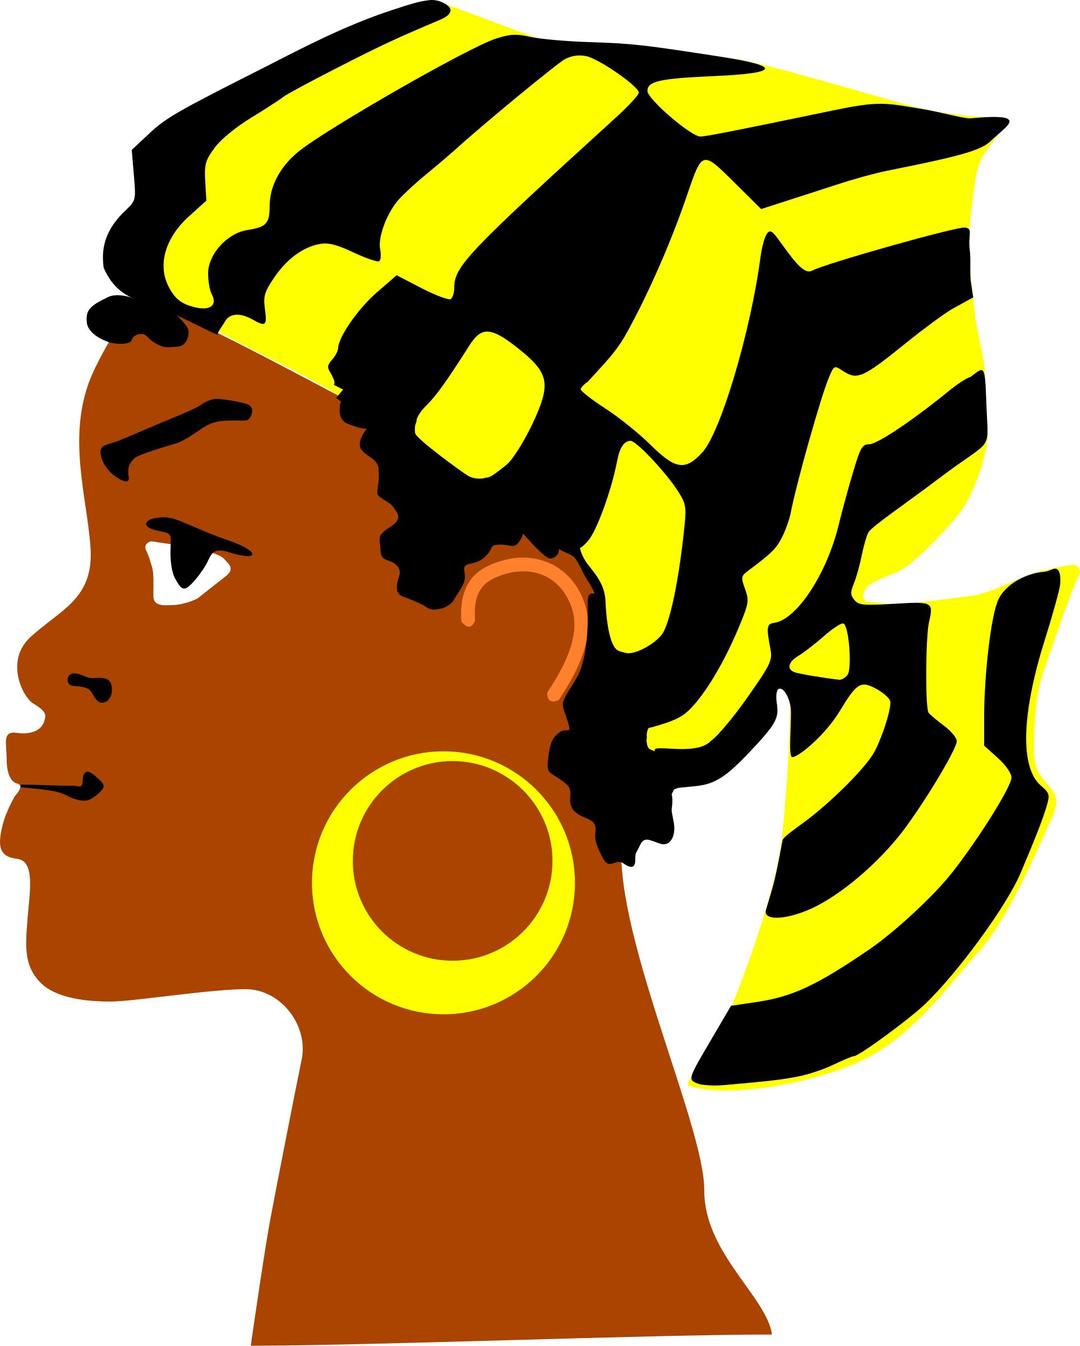 African Lady's Head png transparent